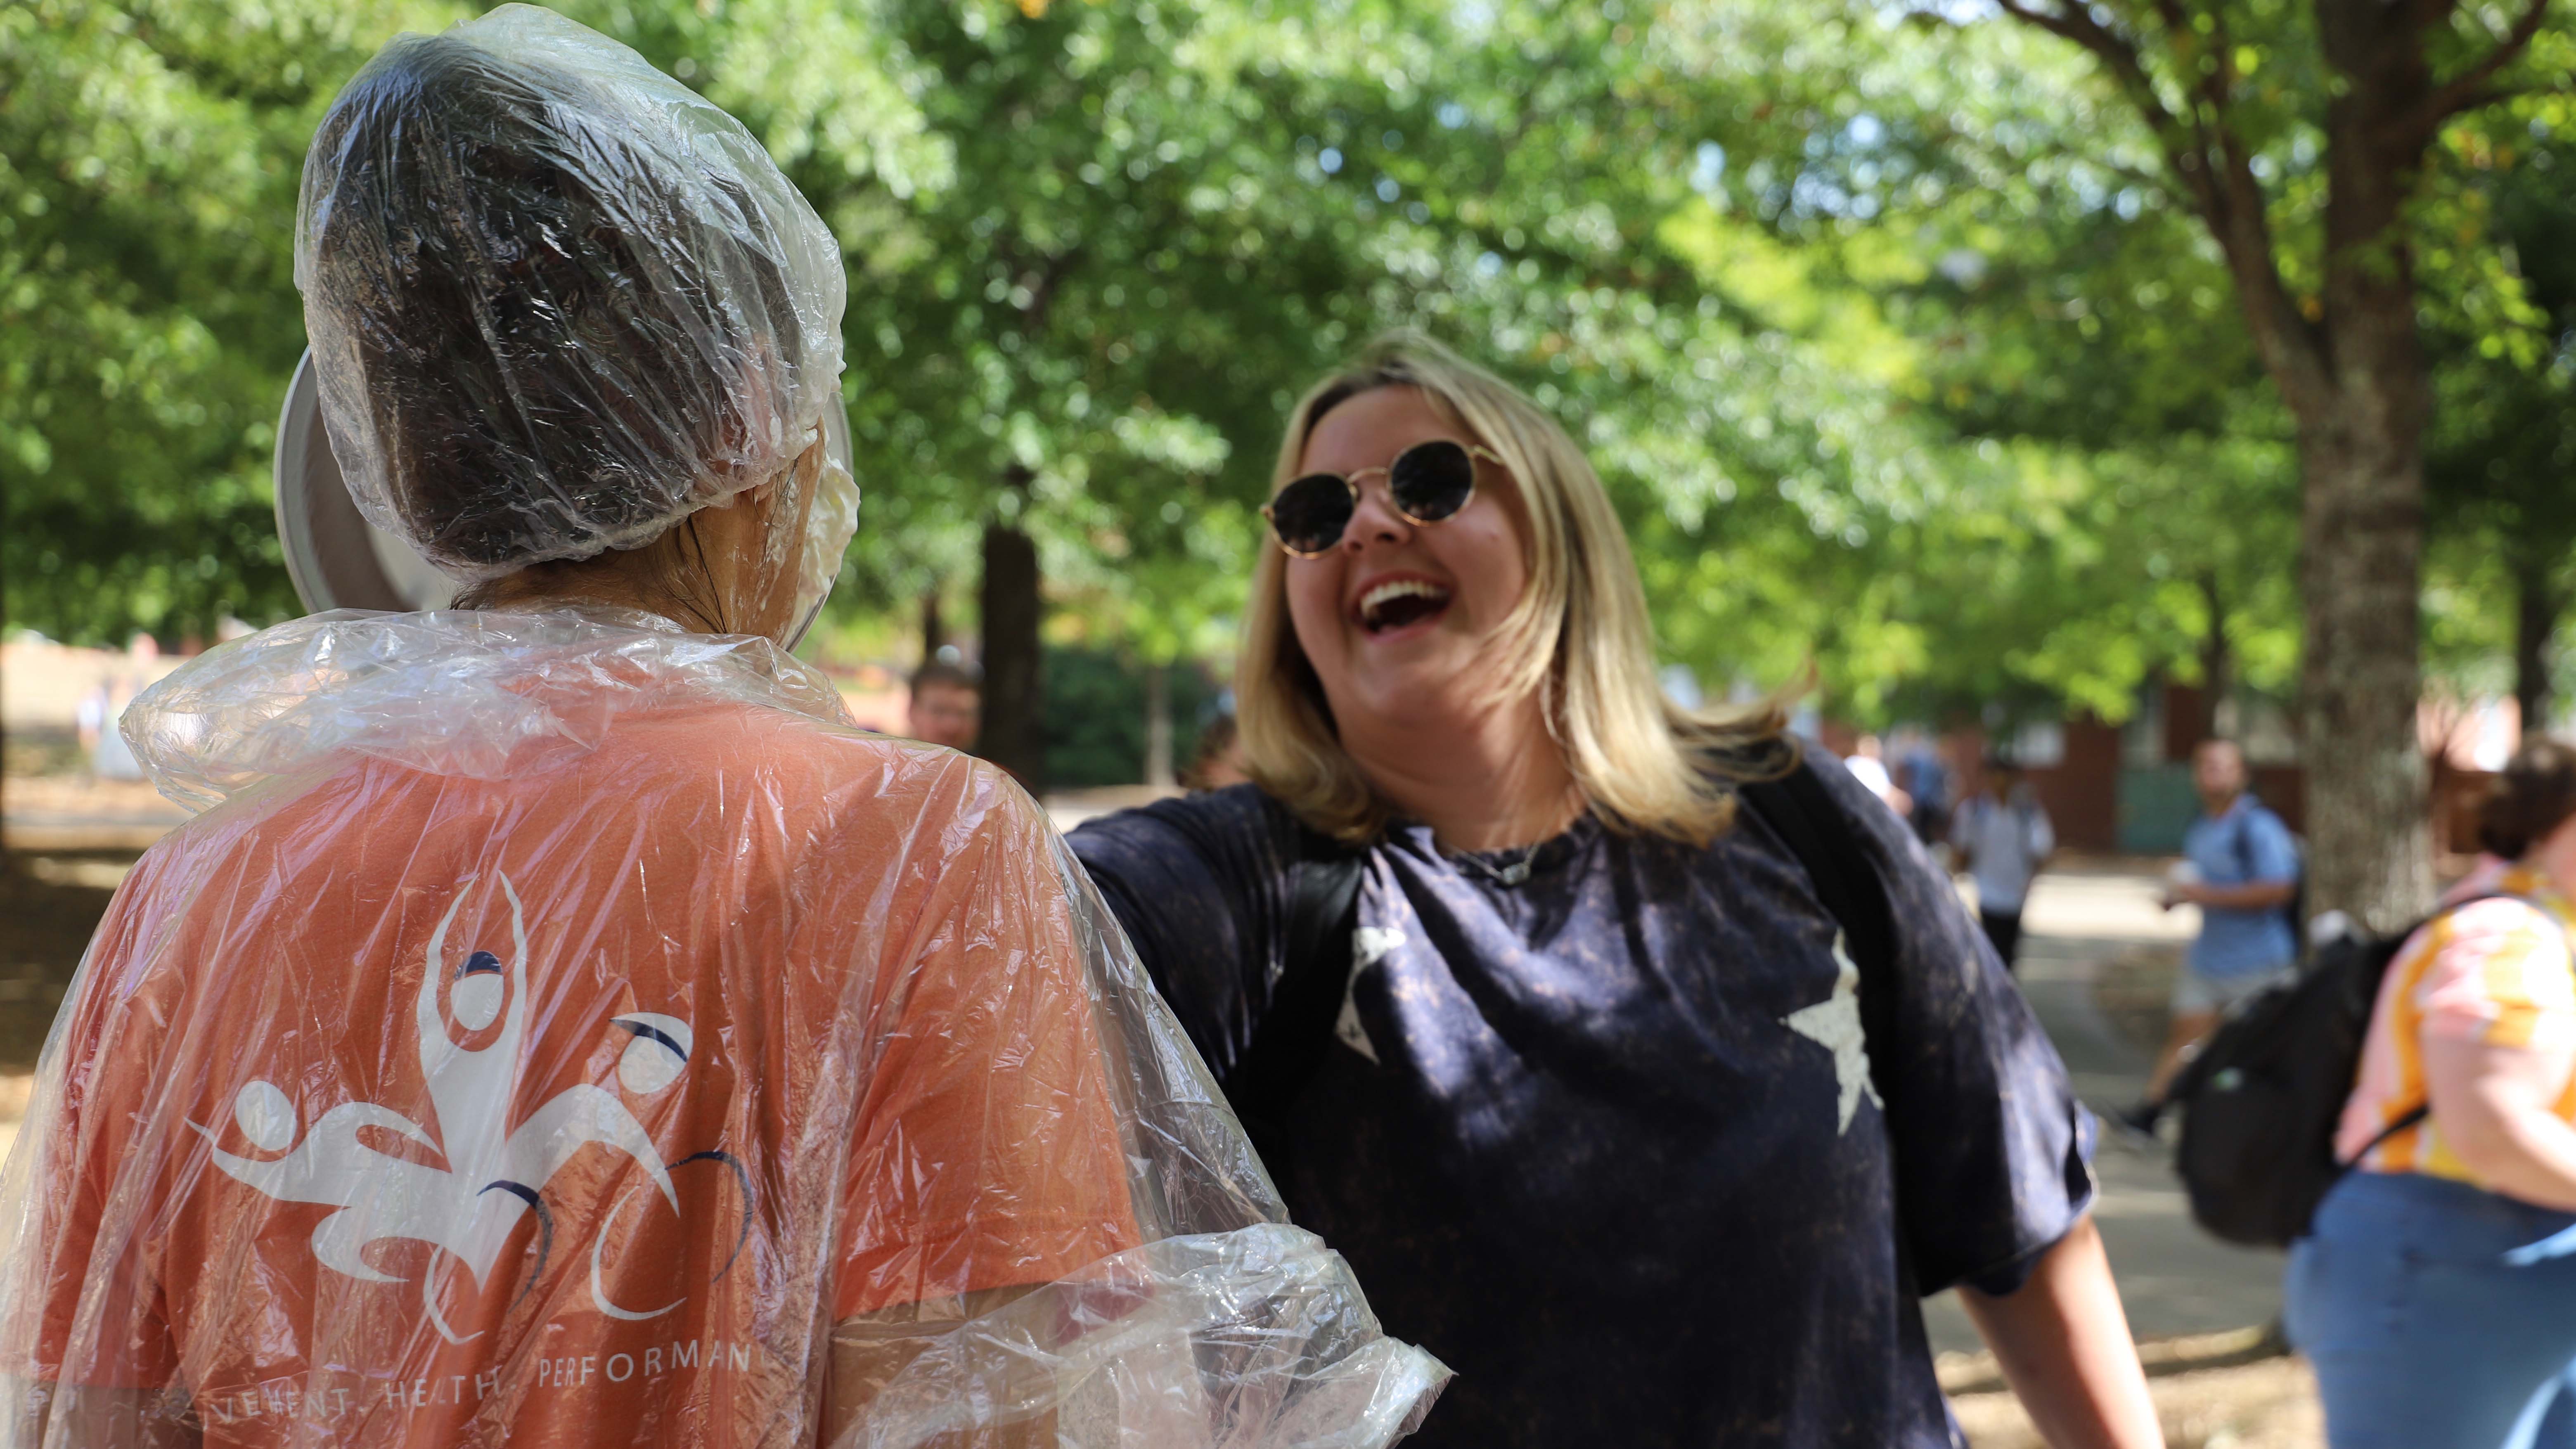 A student throws a pie at a professor